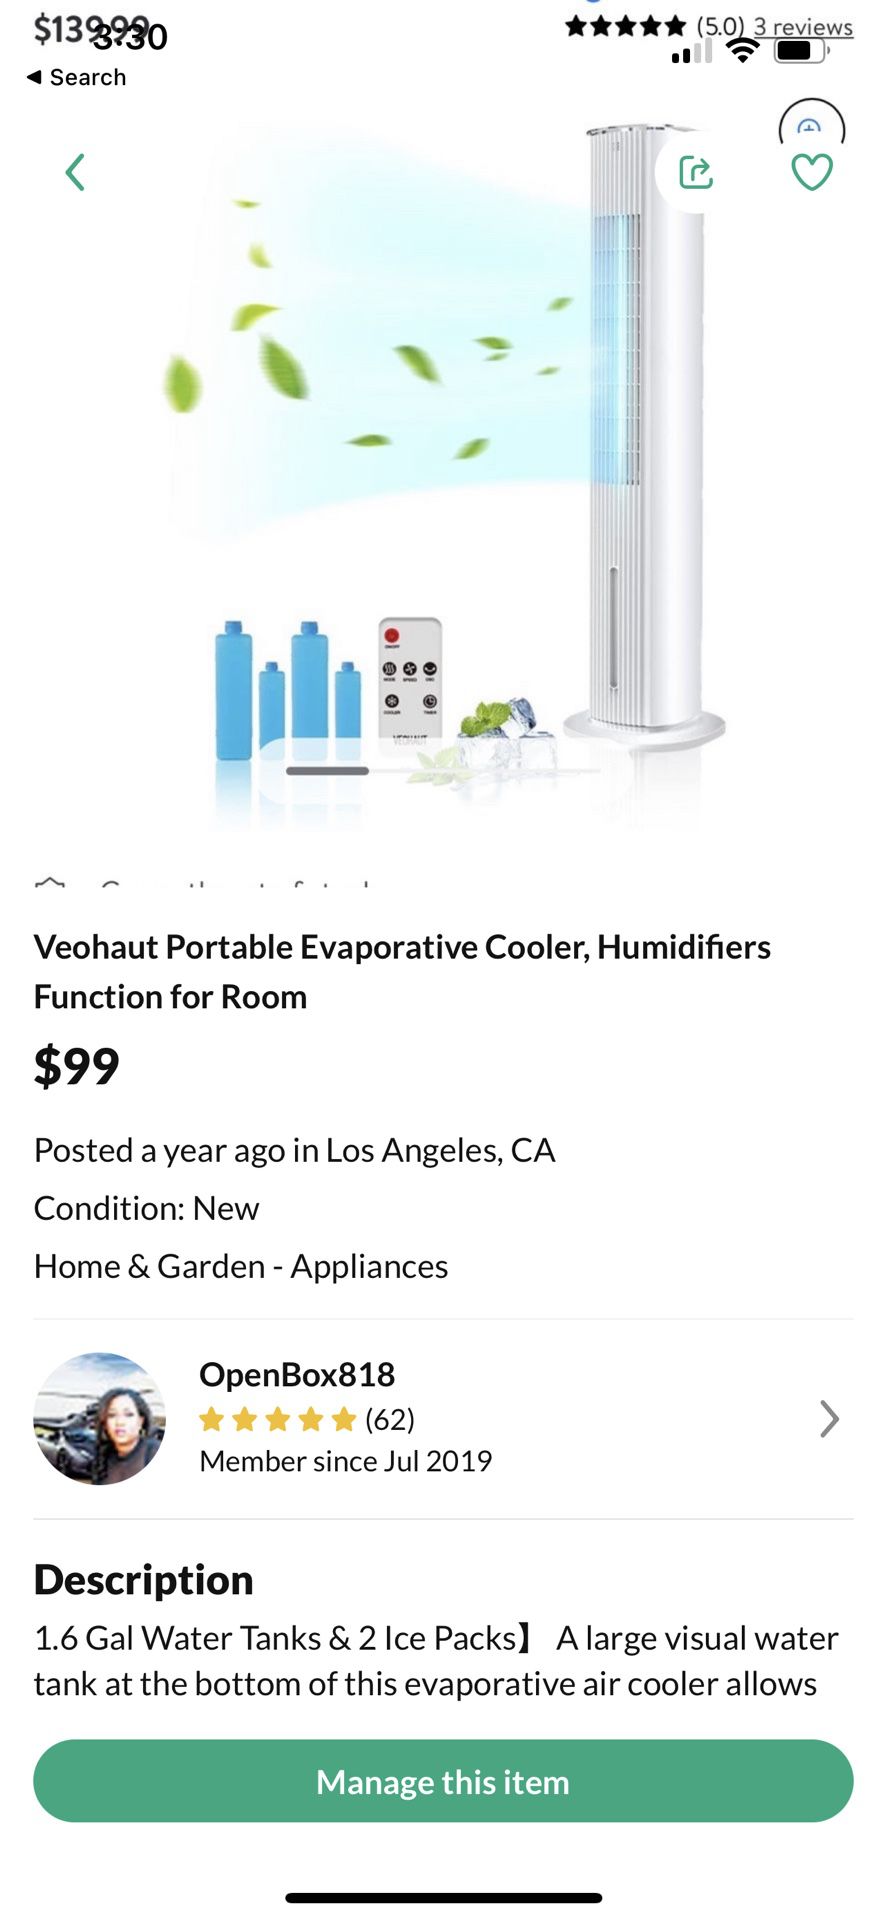 Veohaut Portable Evaporative Cooler, Humidifiers Function for Room $139.99 **** (5.0) 3